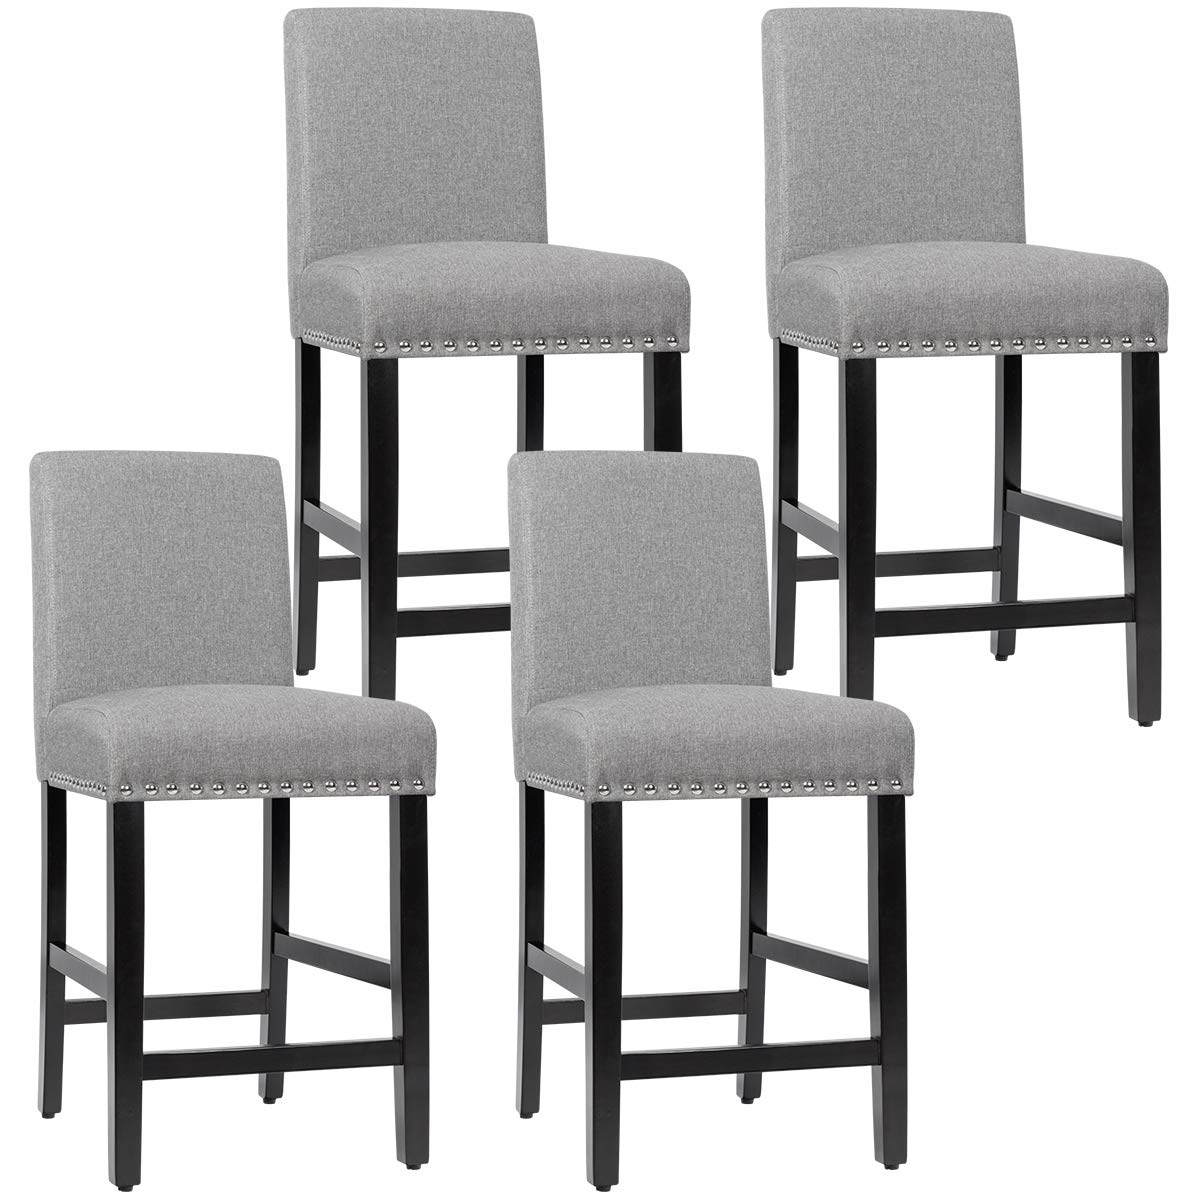 Giantex Upholstered Counter Height Bar Stools w/ Rubber Wood Legs, Breathable Linen Fabric